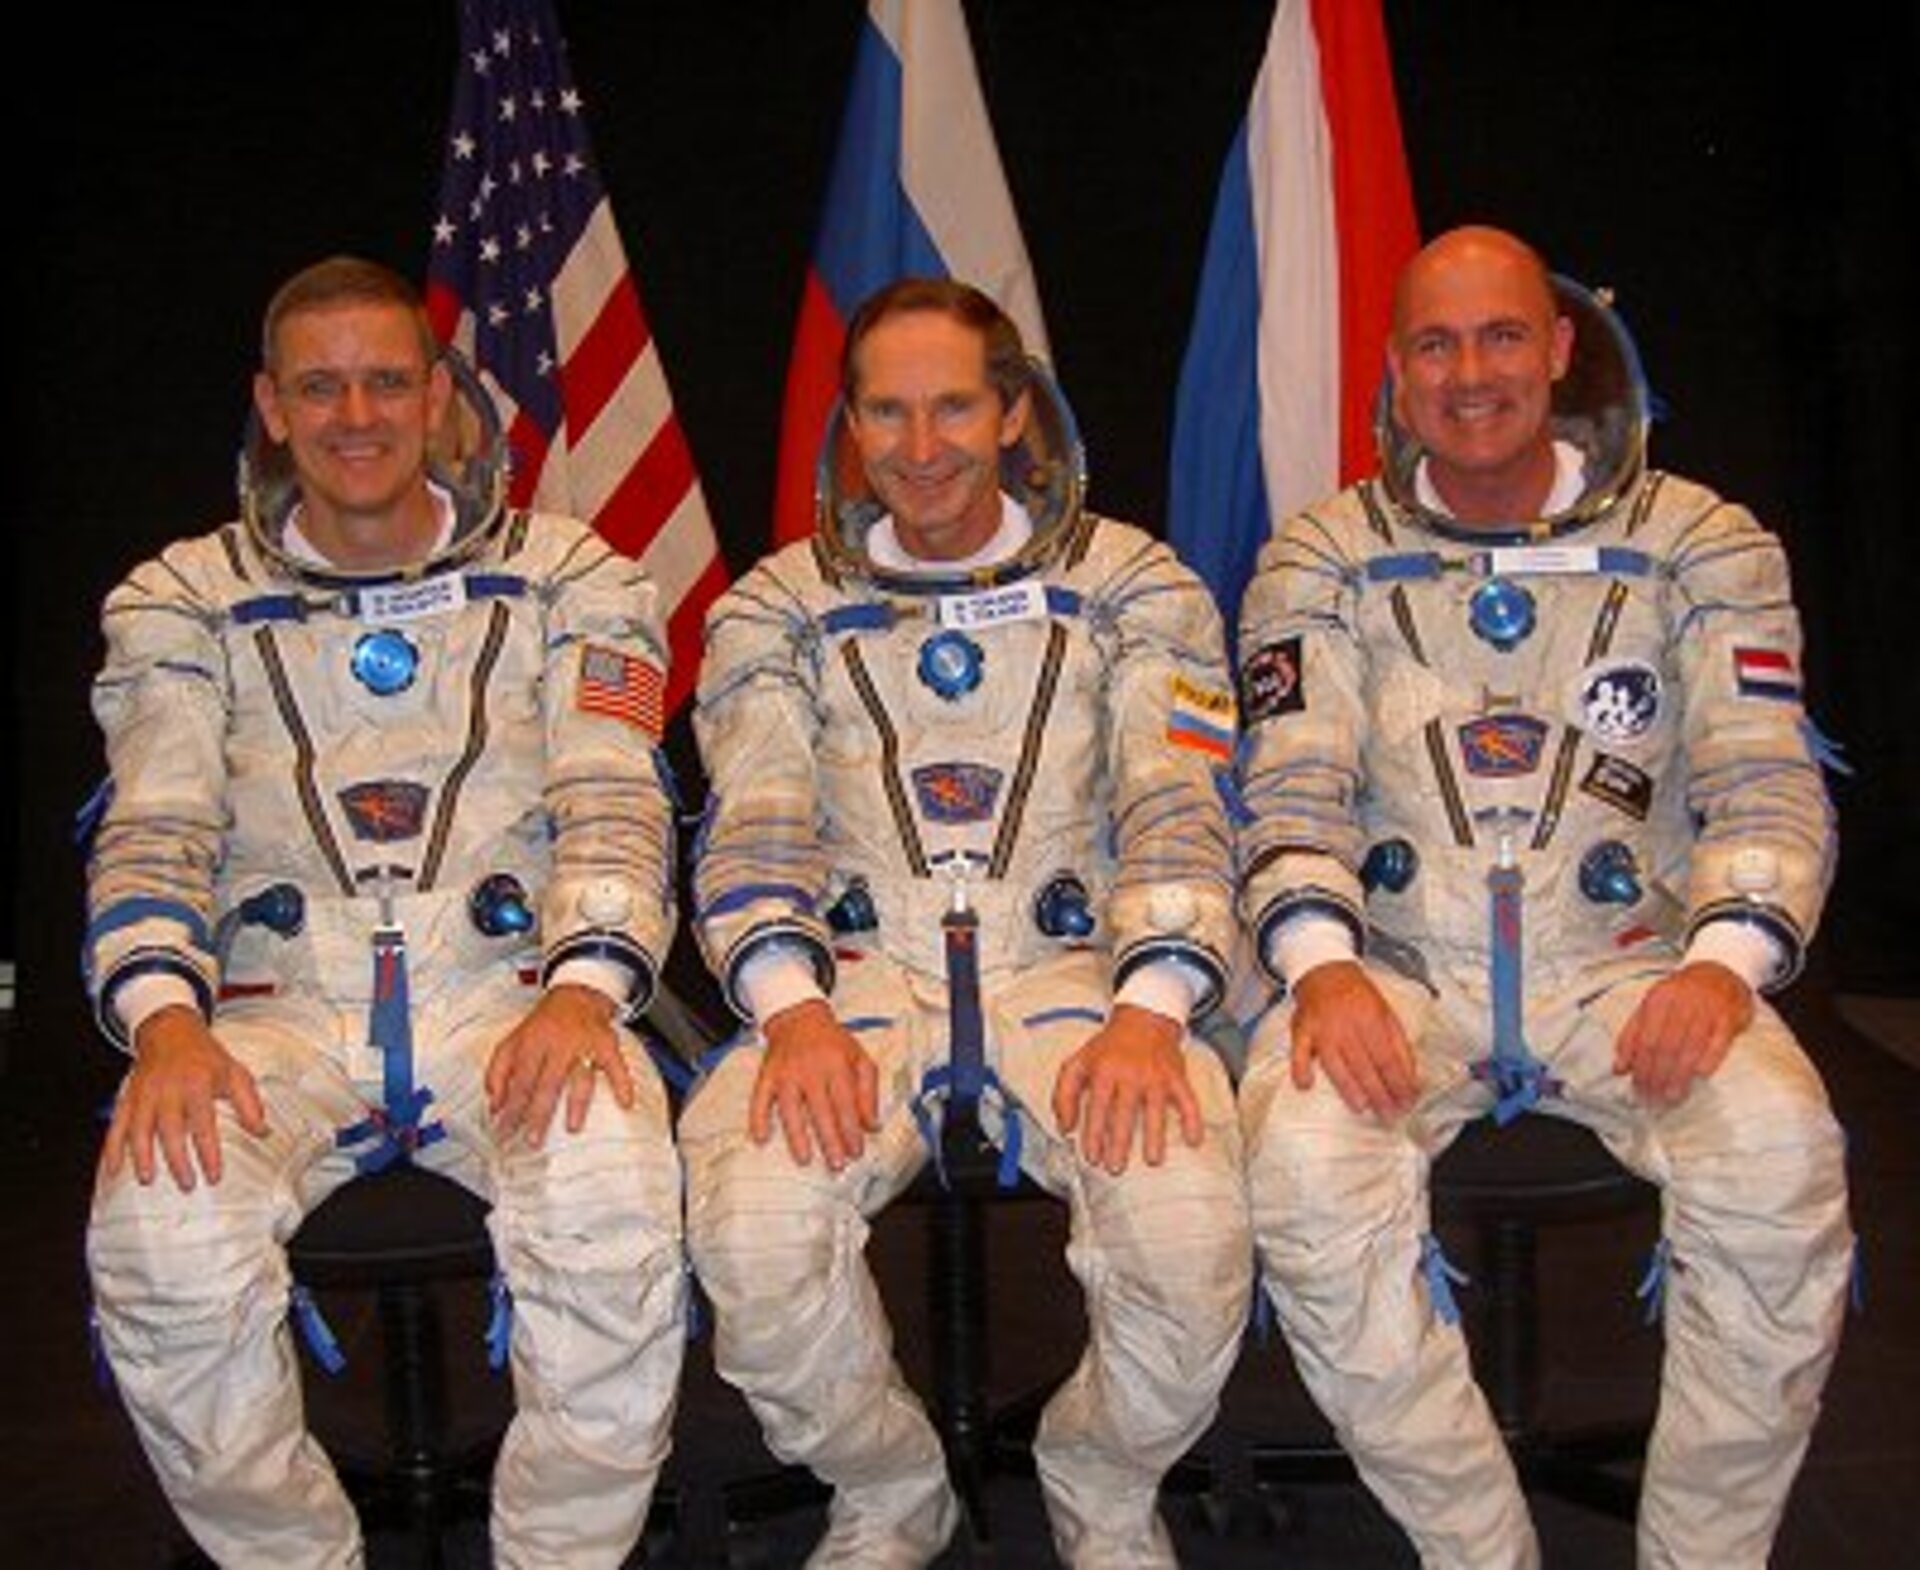 In April 2004, André Kuipers will fly with William McArthur and Valery Tokarev